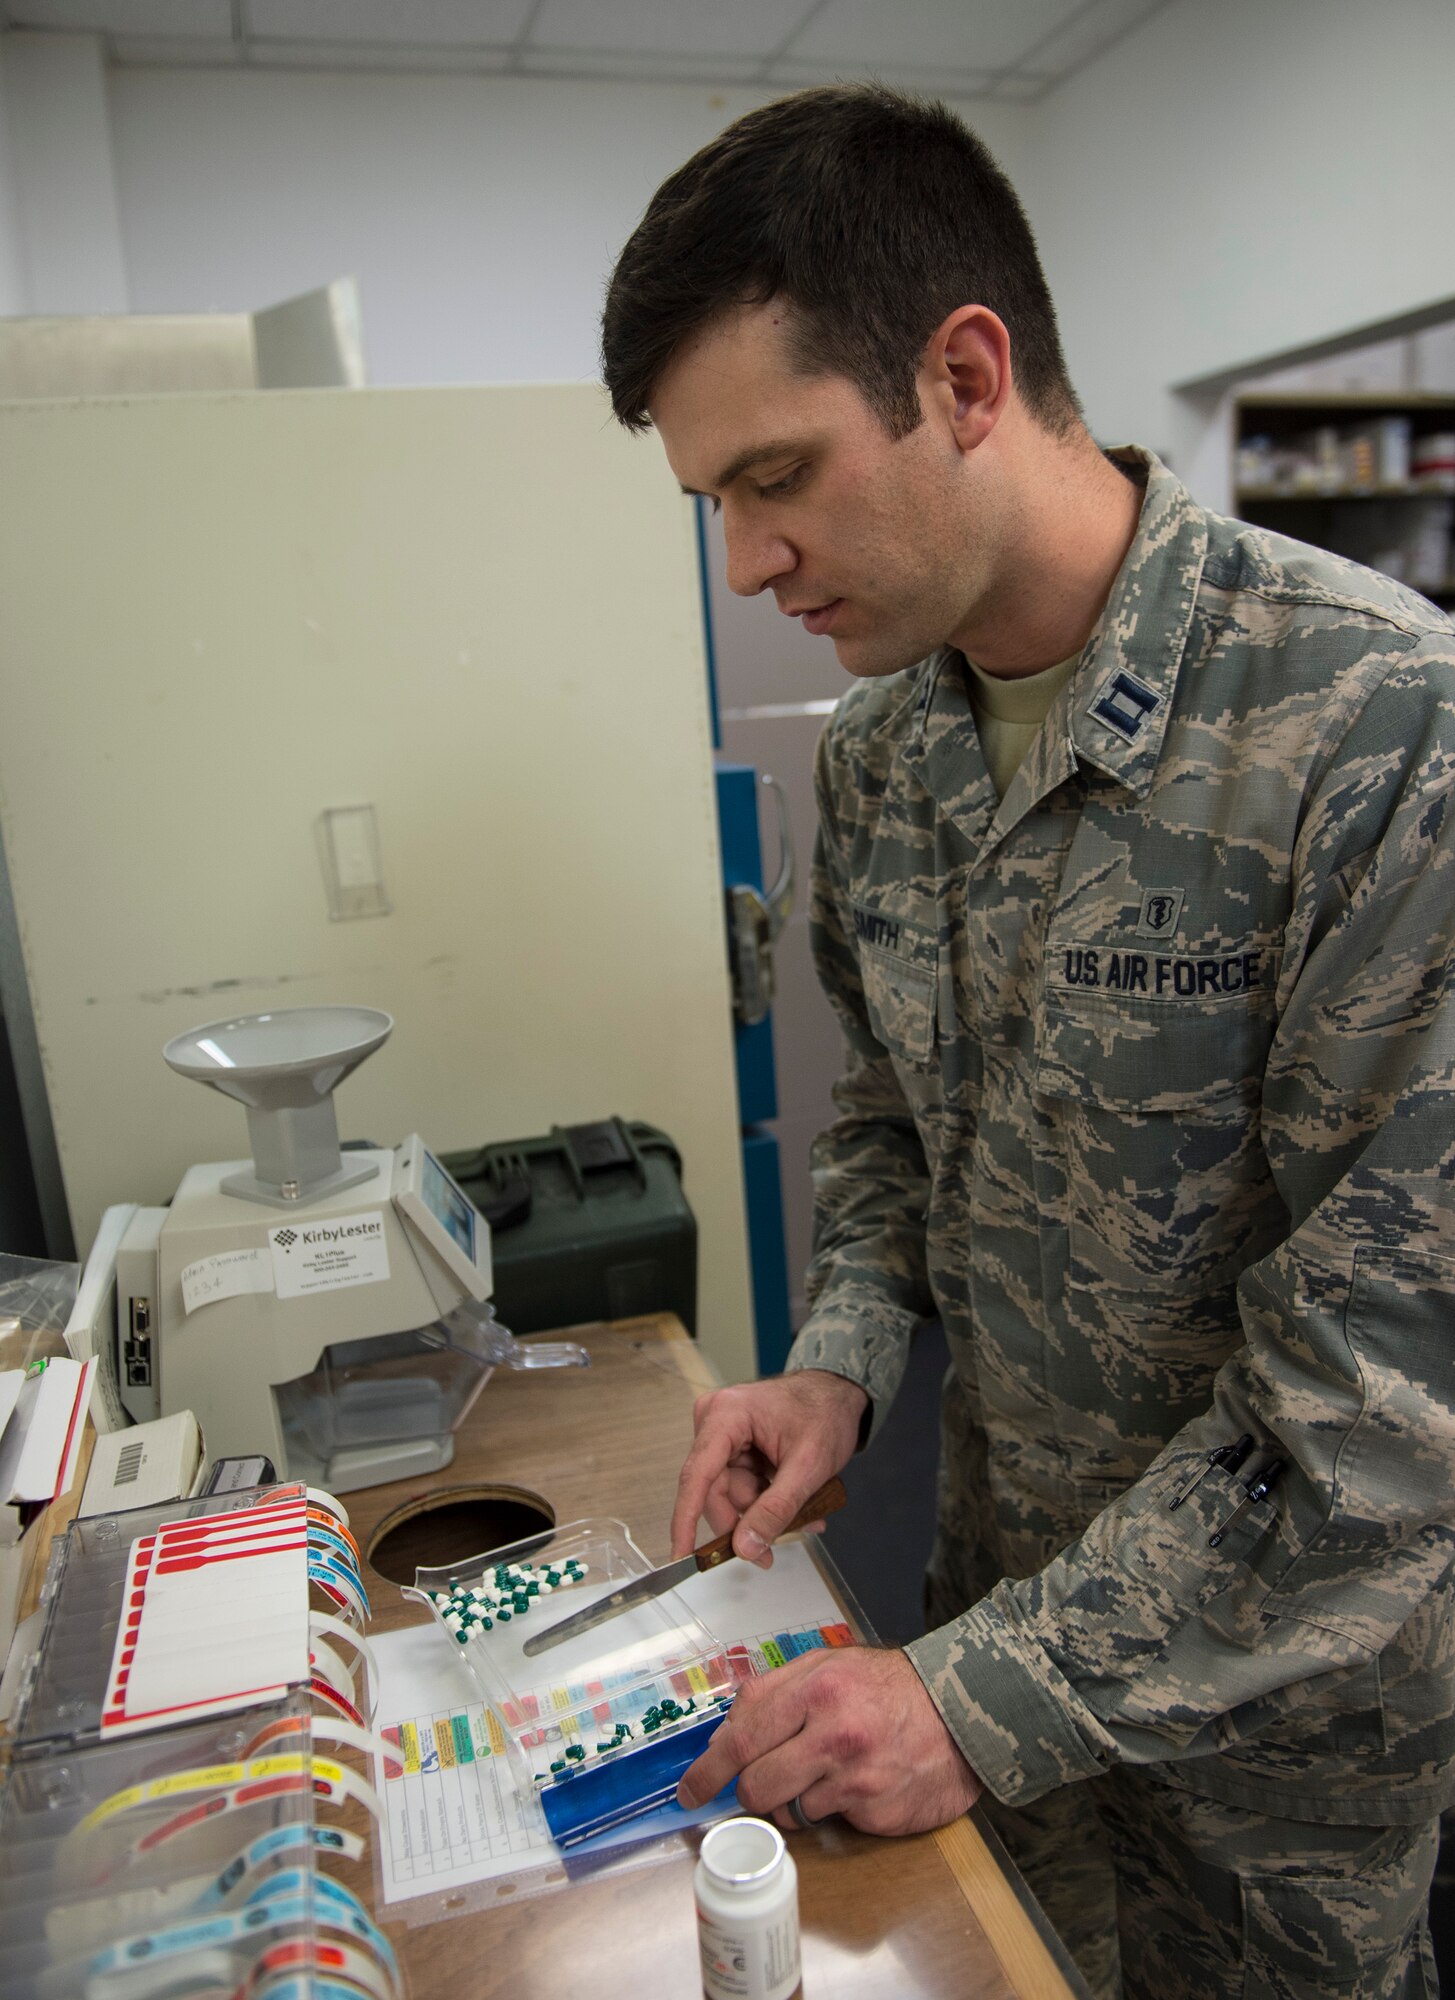 U.S. Air Force Capt. Kyle Smith, a pharmacist with the 379th Expeditionary Medical Operations Squadron, counts out numbers of prescription medication at Al Udeid Air Base, Qatar, May 15, 2017. Airmen assigned to the pharmacy are responsible for managing all of the medication a patient brings from home, filling new prescriptions issued here and submitting a request if a medication is running low. (U.S. Air Force photo by Tech. Sgt. Amy M. Lovgren)